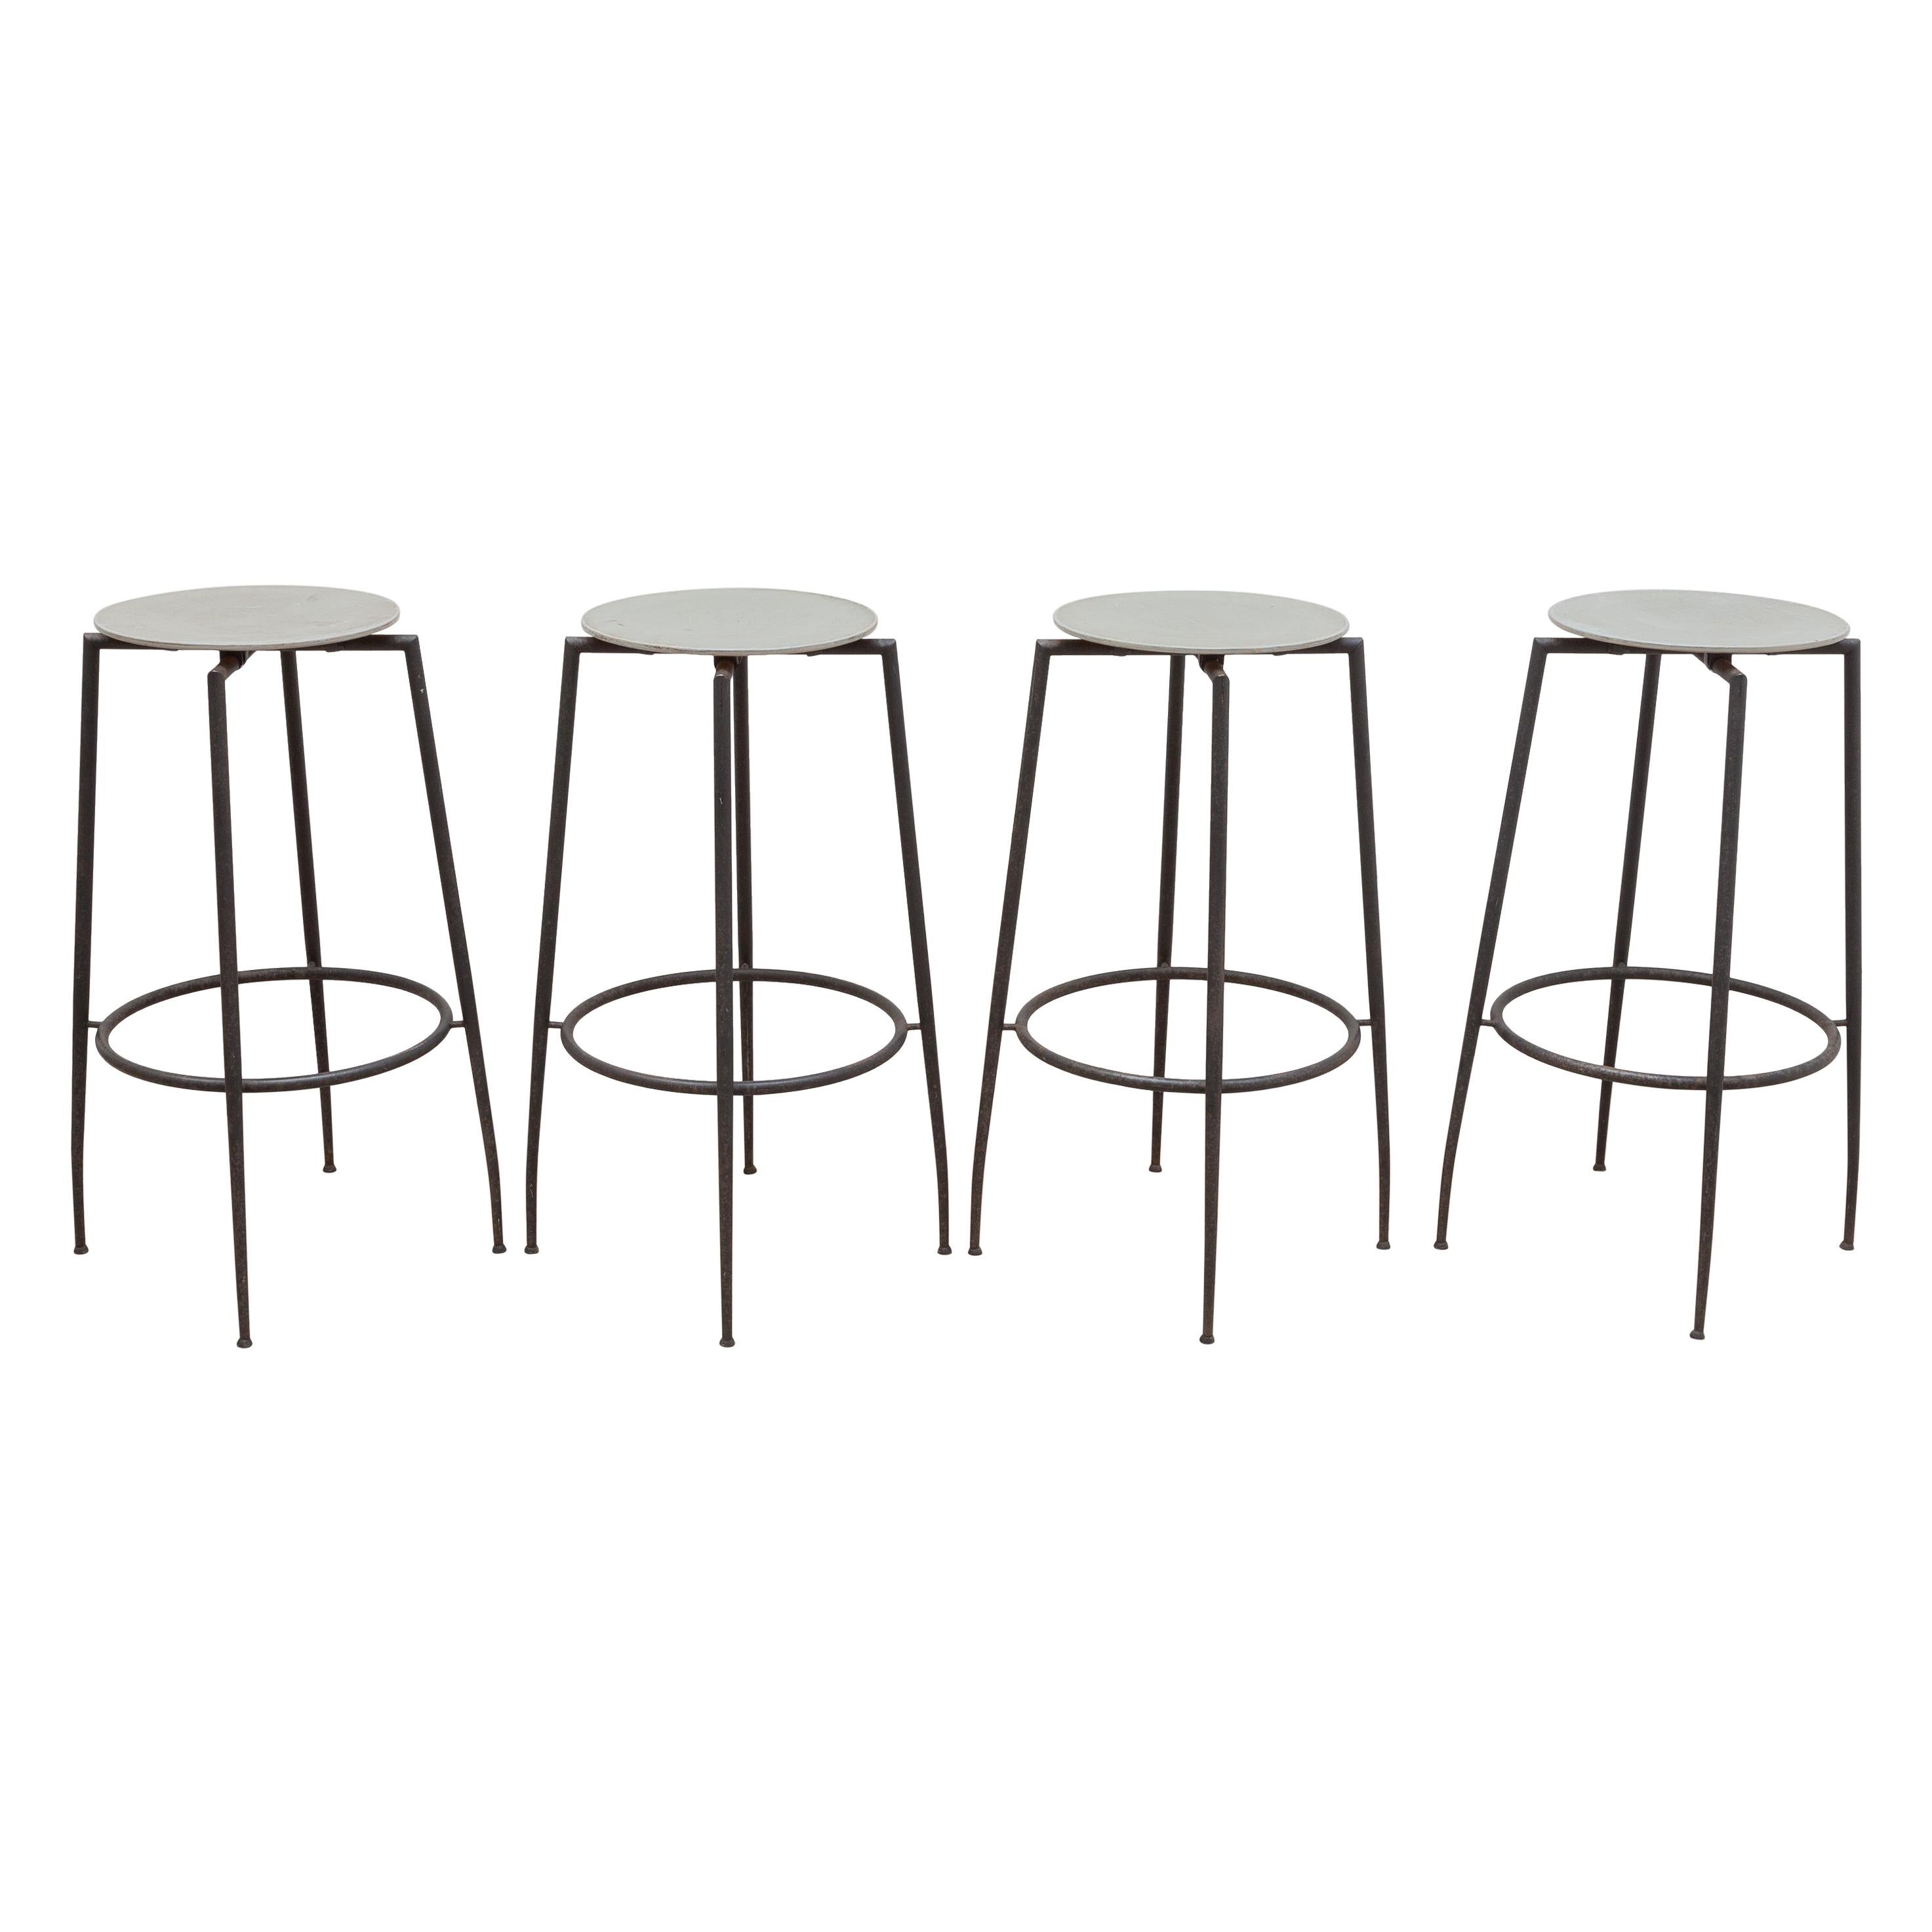 Wrought Iron Industrial Foot Stools Designed by Foraform, Norway